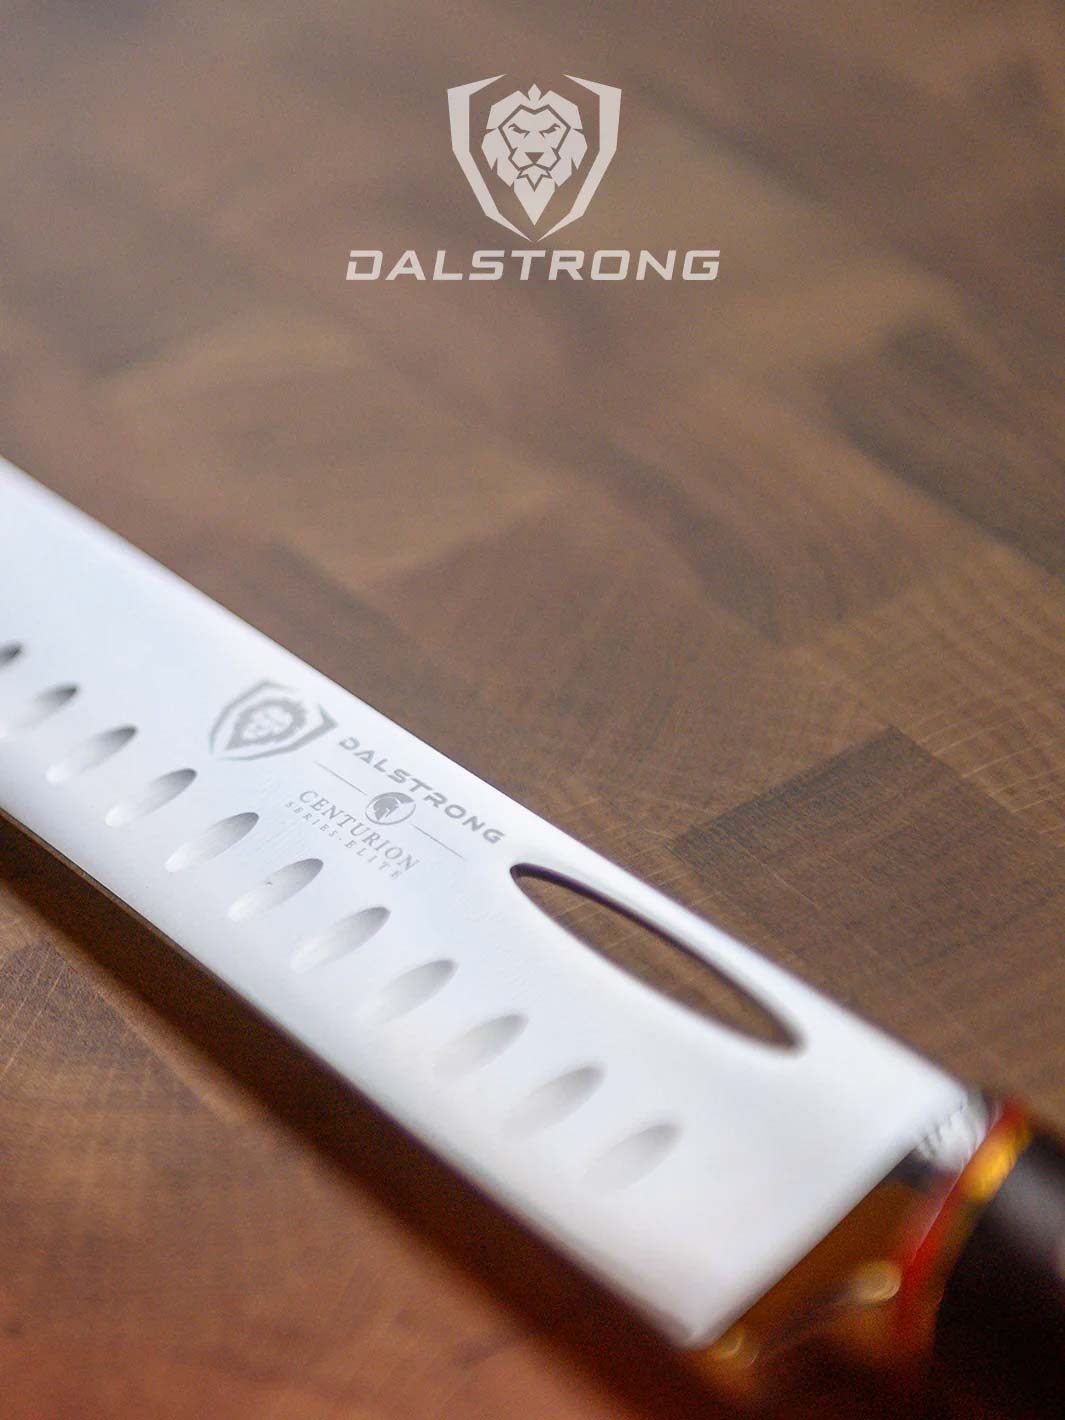 Dalstrong centurion series 12 inch slicing and carving knife on top of a cutting board.